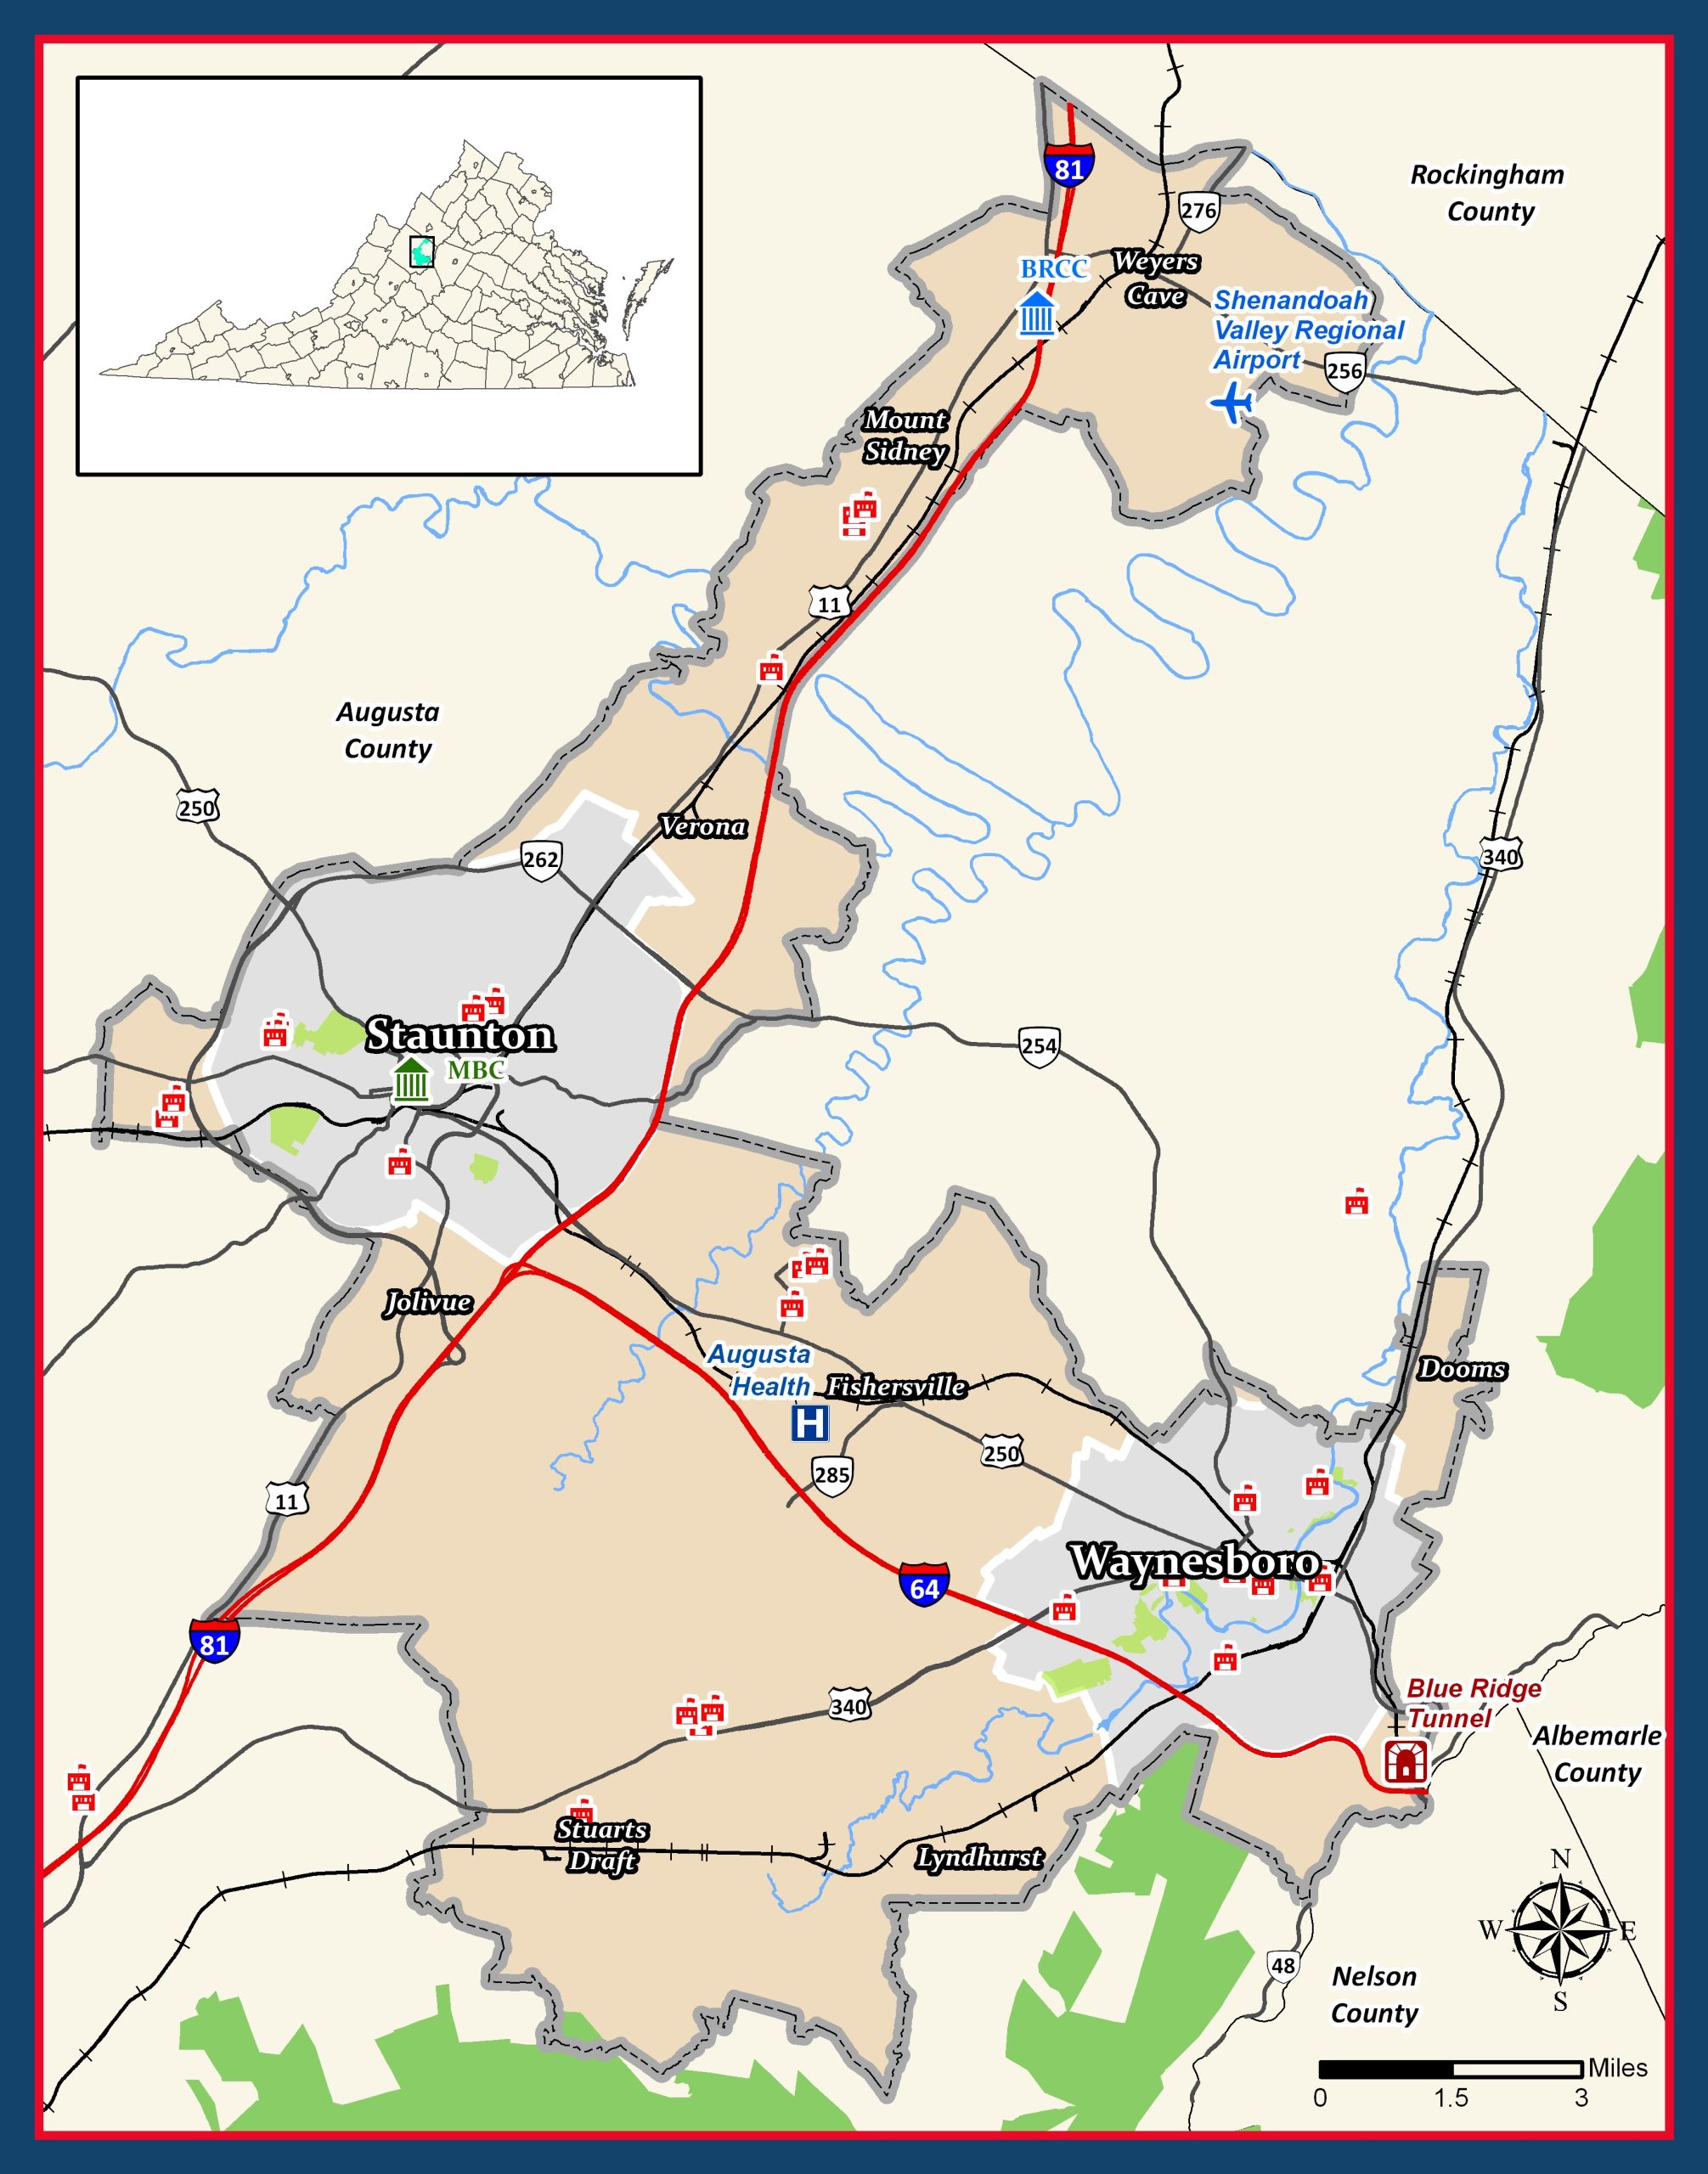 Base map of the Staunton Augusta Waynesboro area displaying county limits, main roads, and water streams, as well as its position within the map of the state of Virginia.